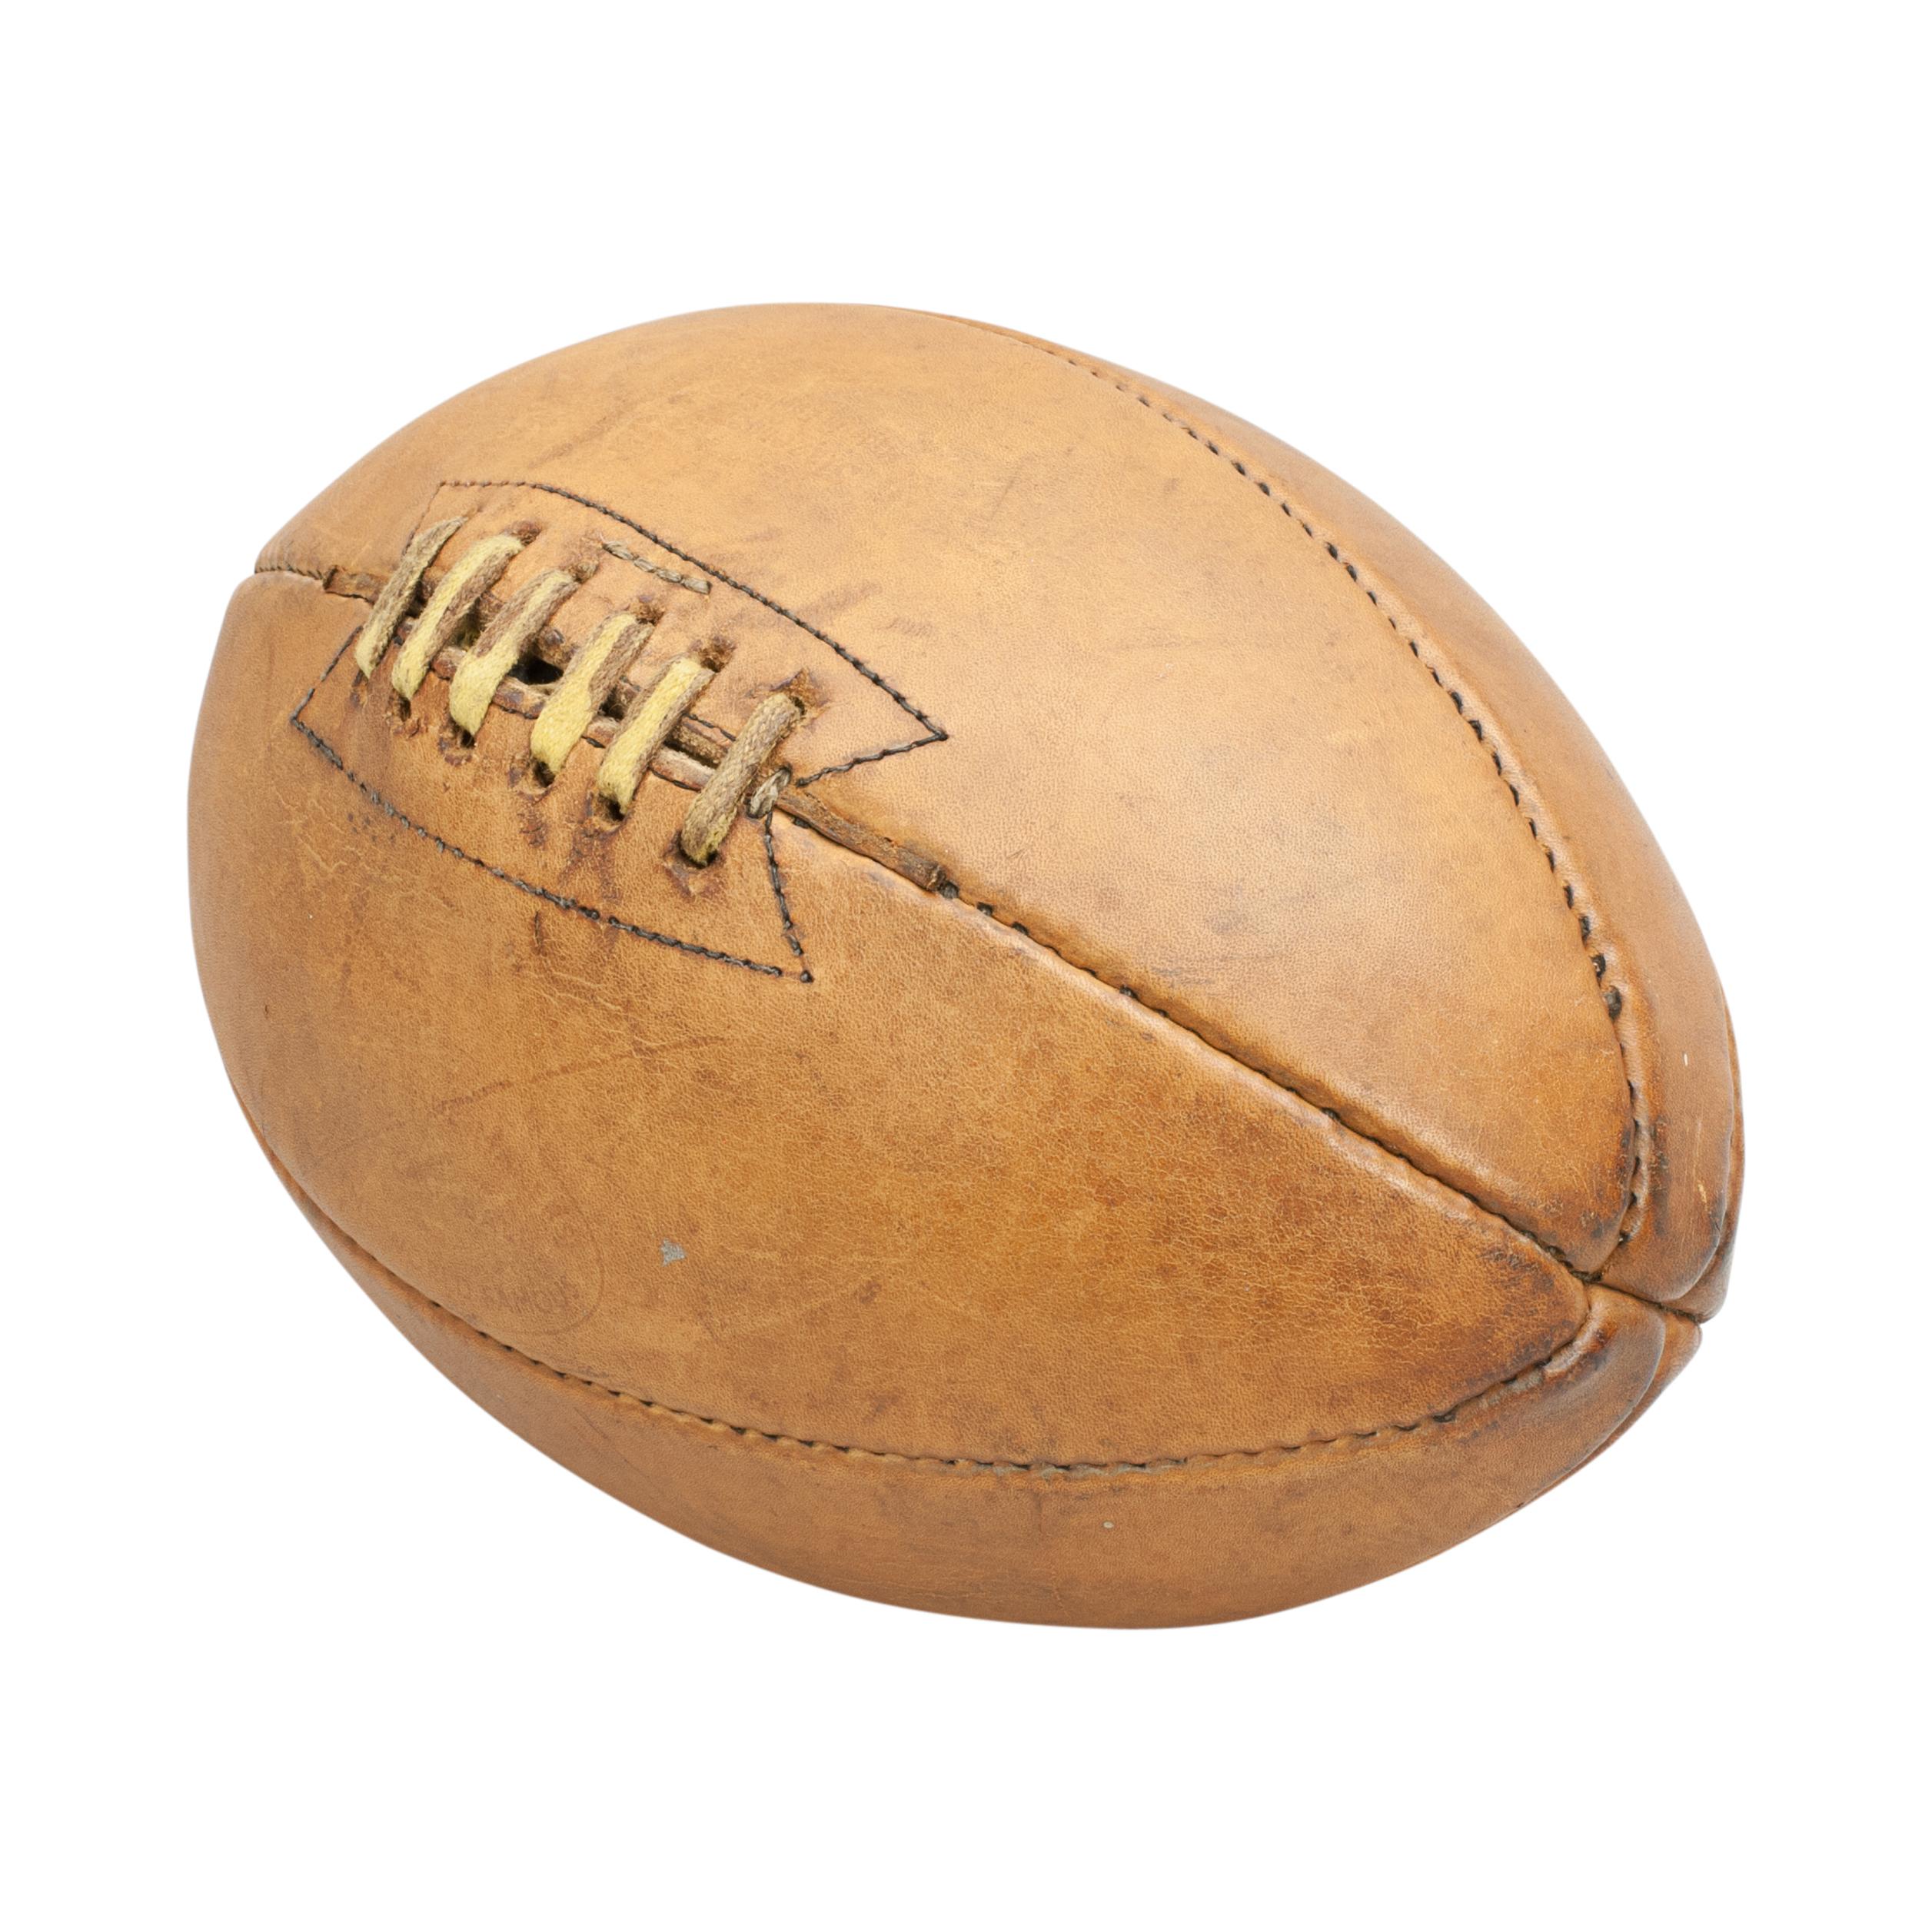 Vintage Sykes Rugby Ball, Perfection in Leather